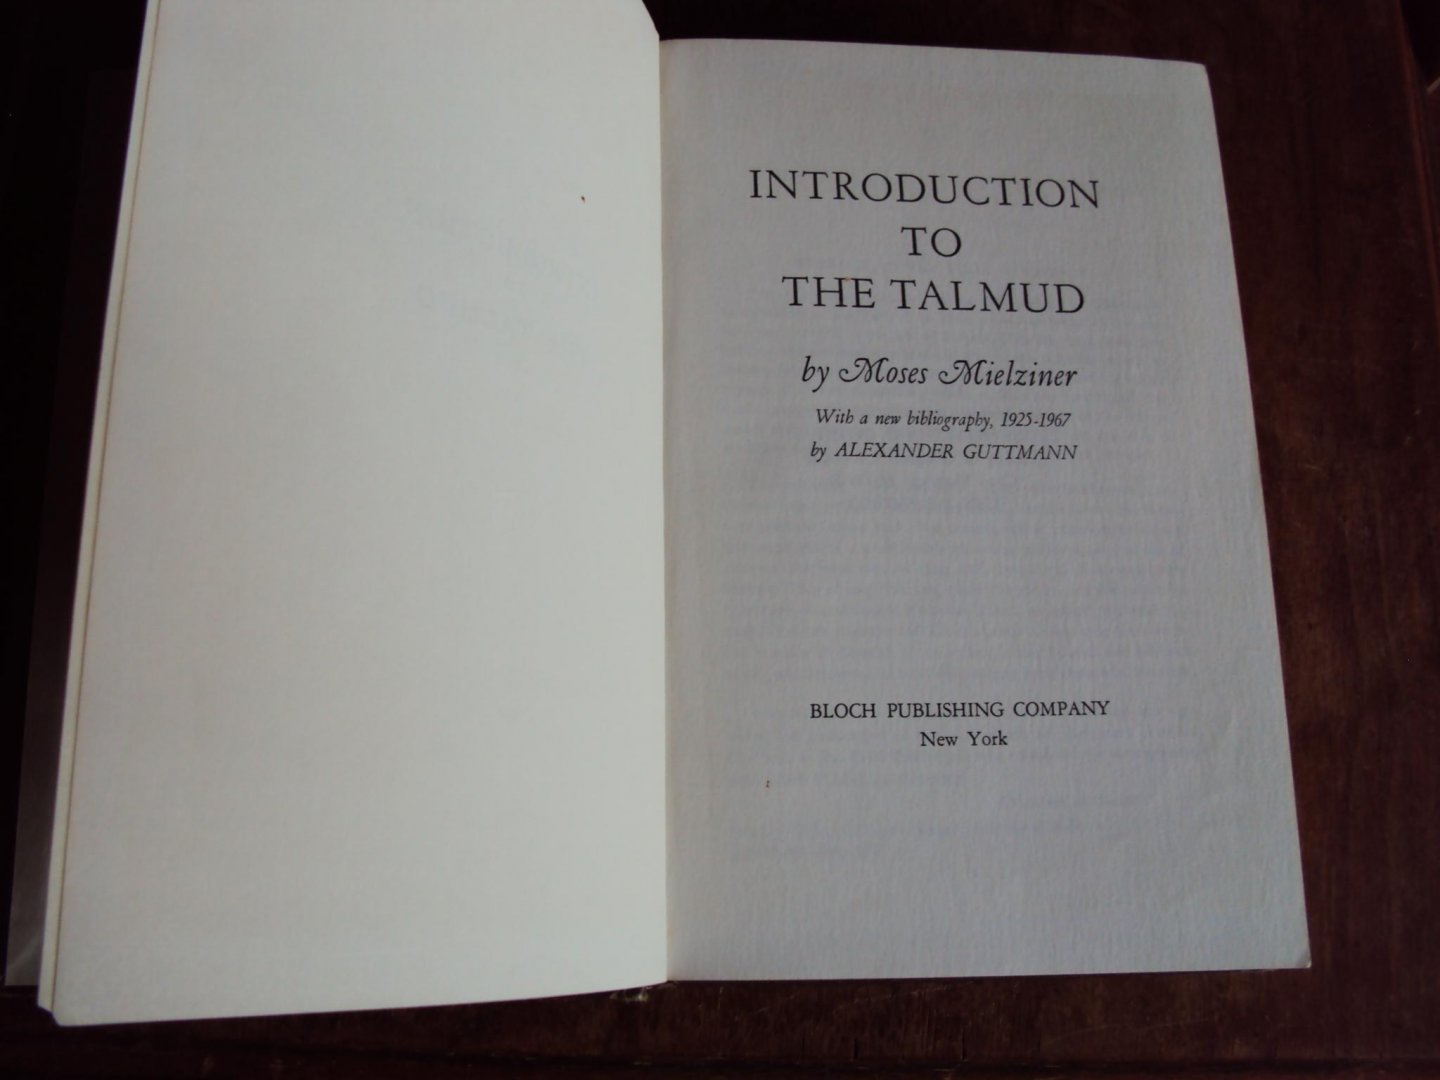 Mielziner, Moses - Introduction to the Talmud